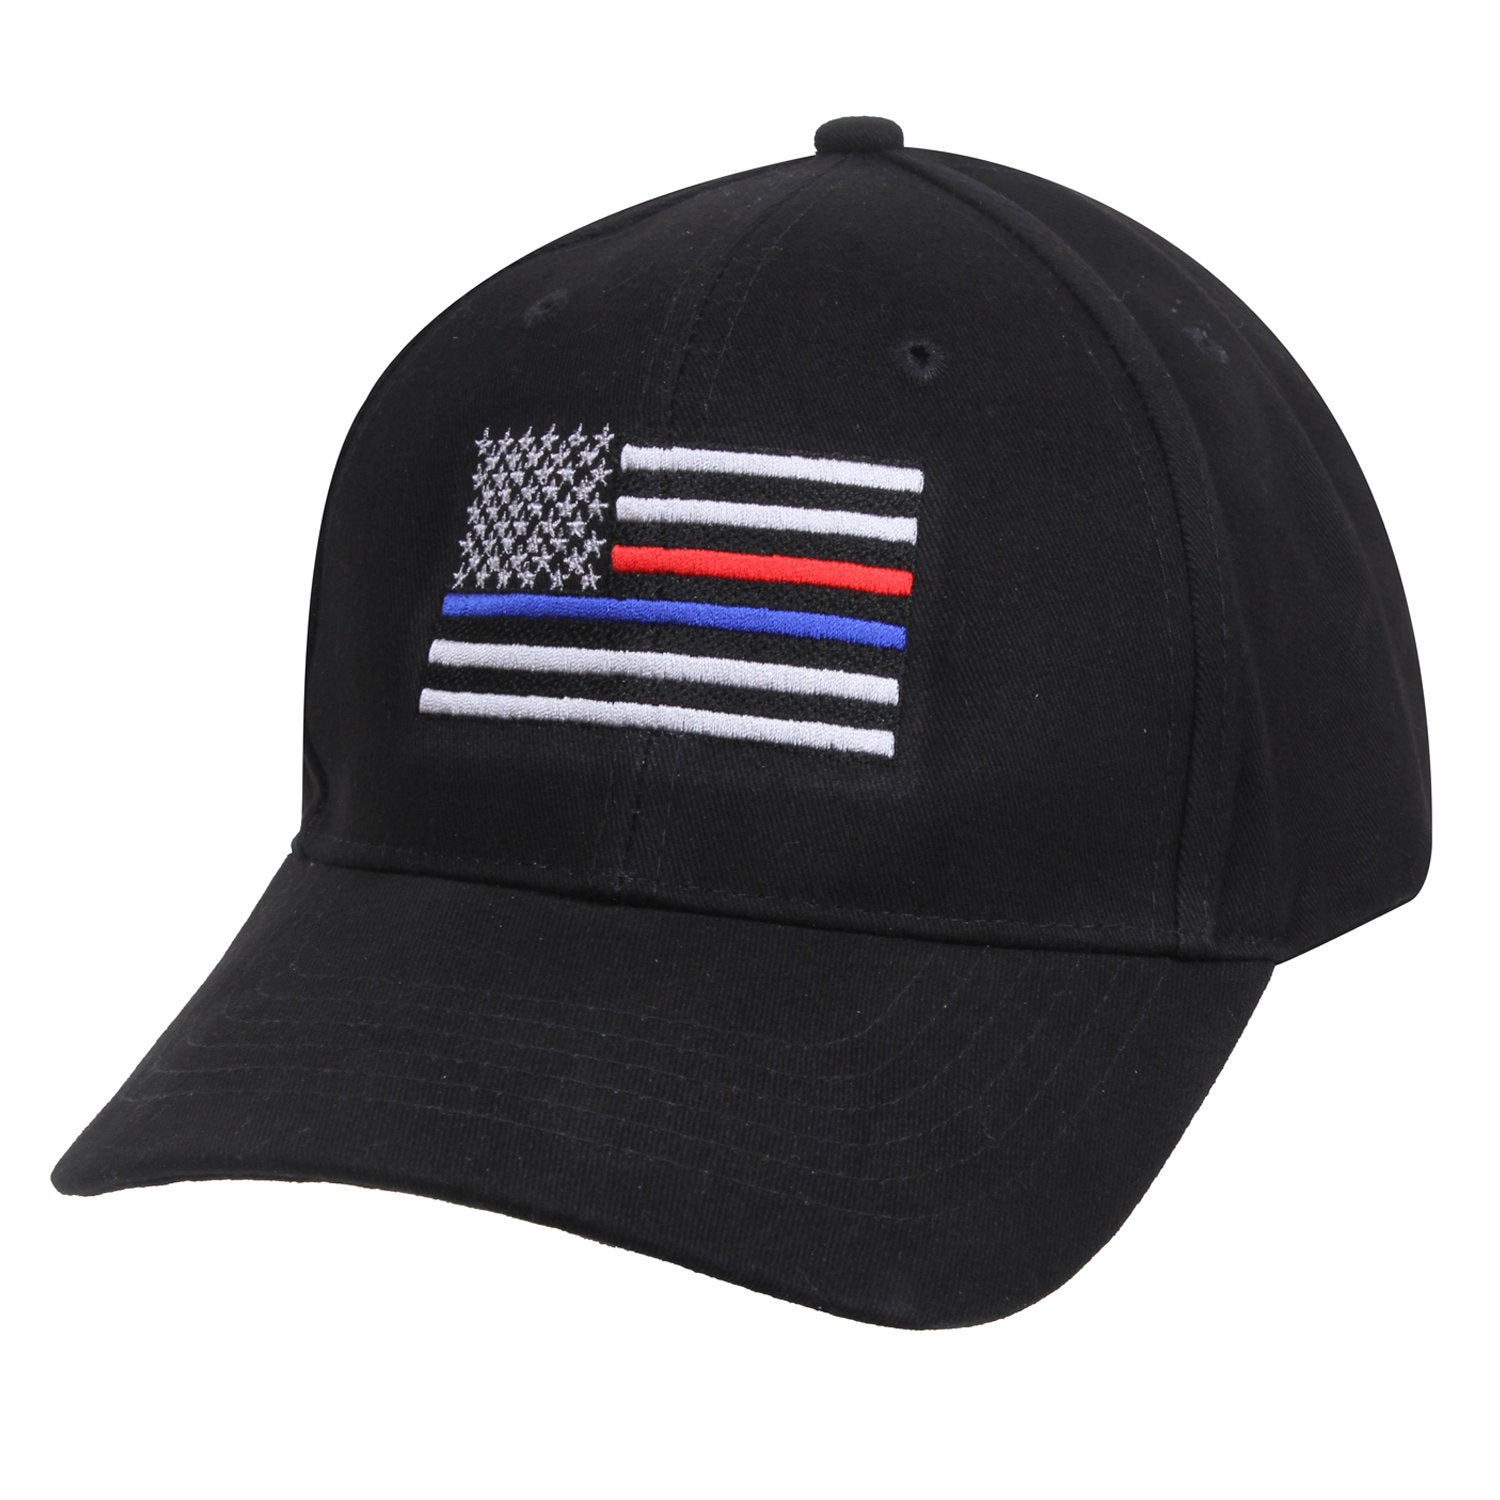 Embroidered Thin Blue Line / Thin Red Line Flag Hat Black